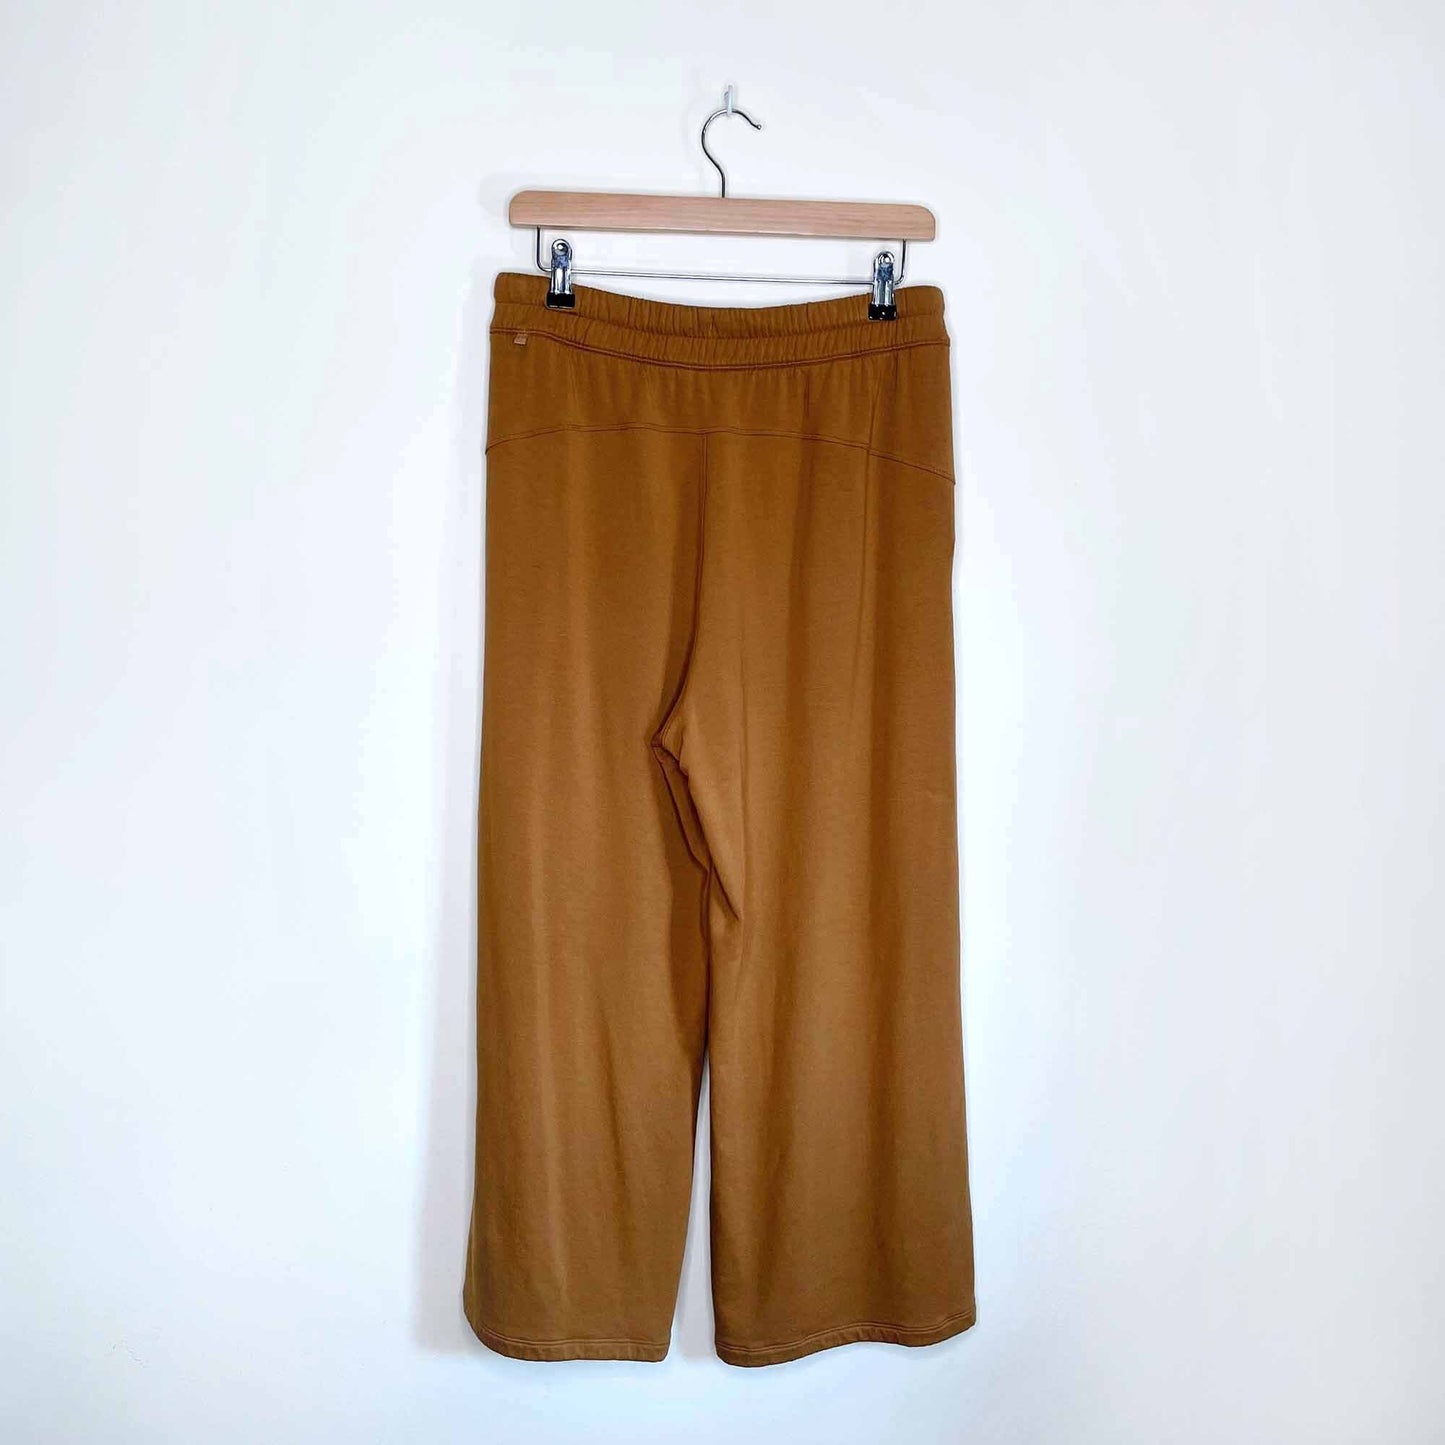 lululemon bound to bliss high rise 7/8 pant in spiced bronze - size 8